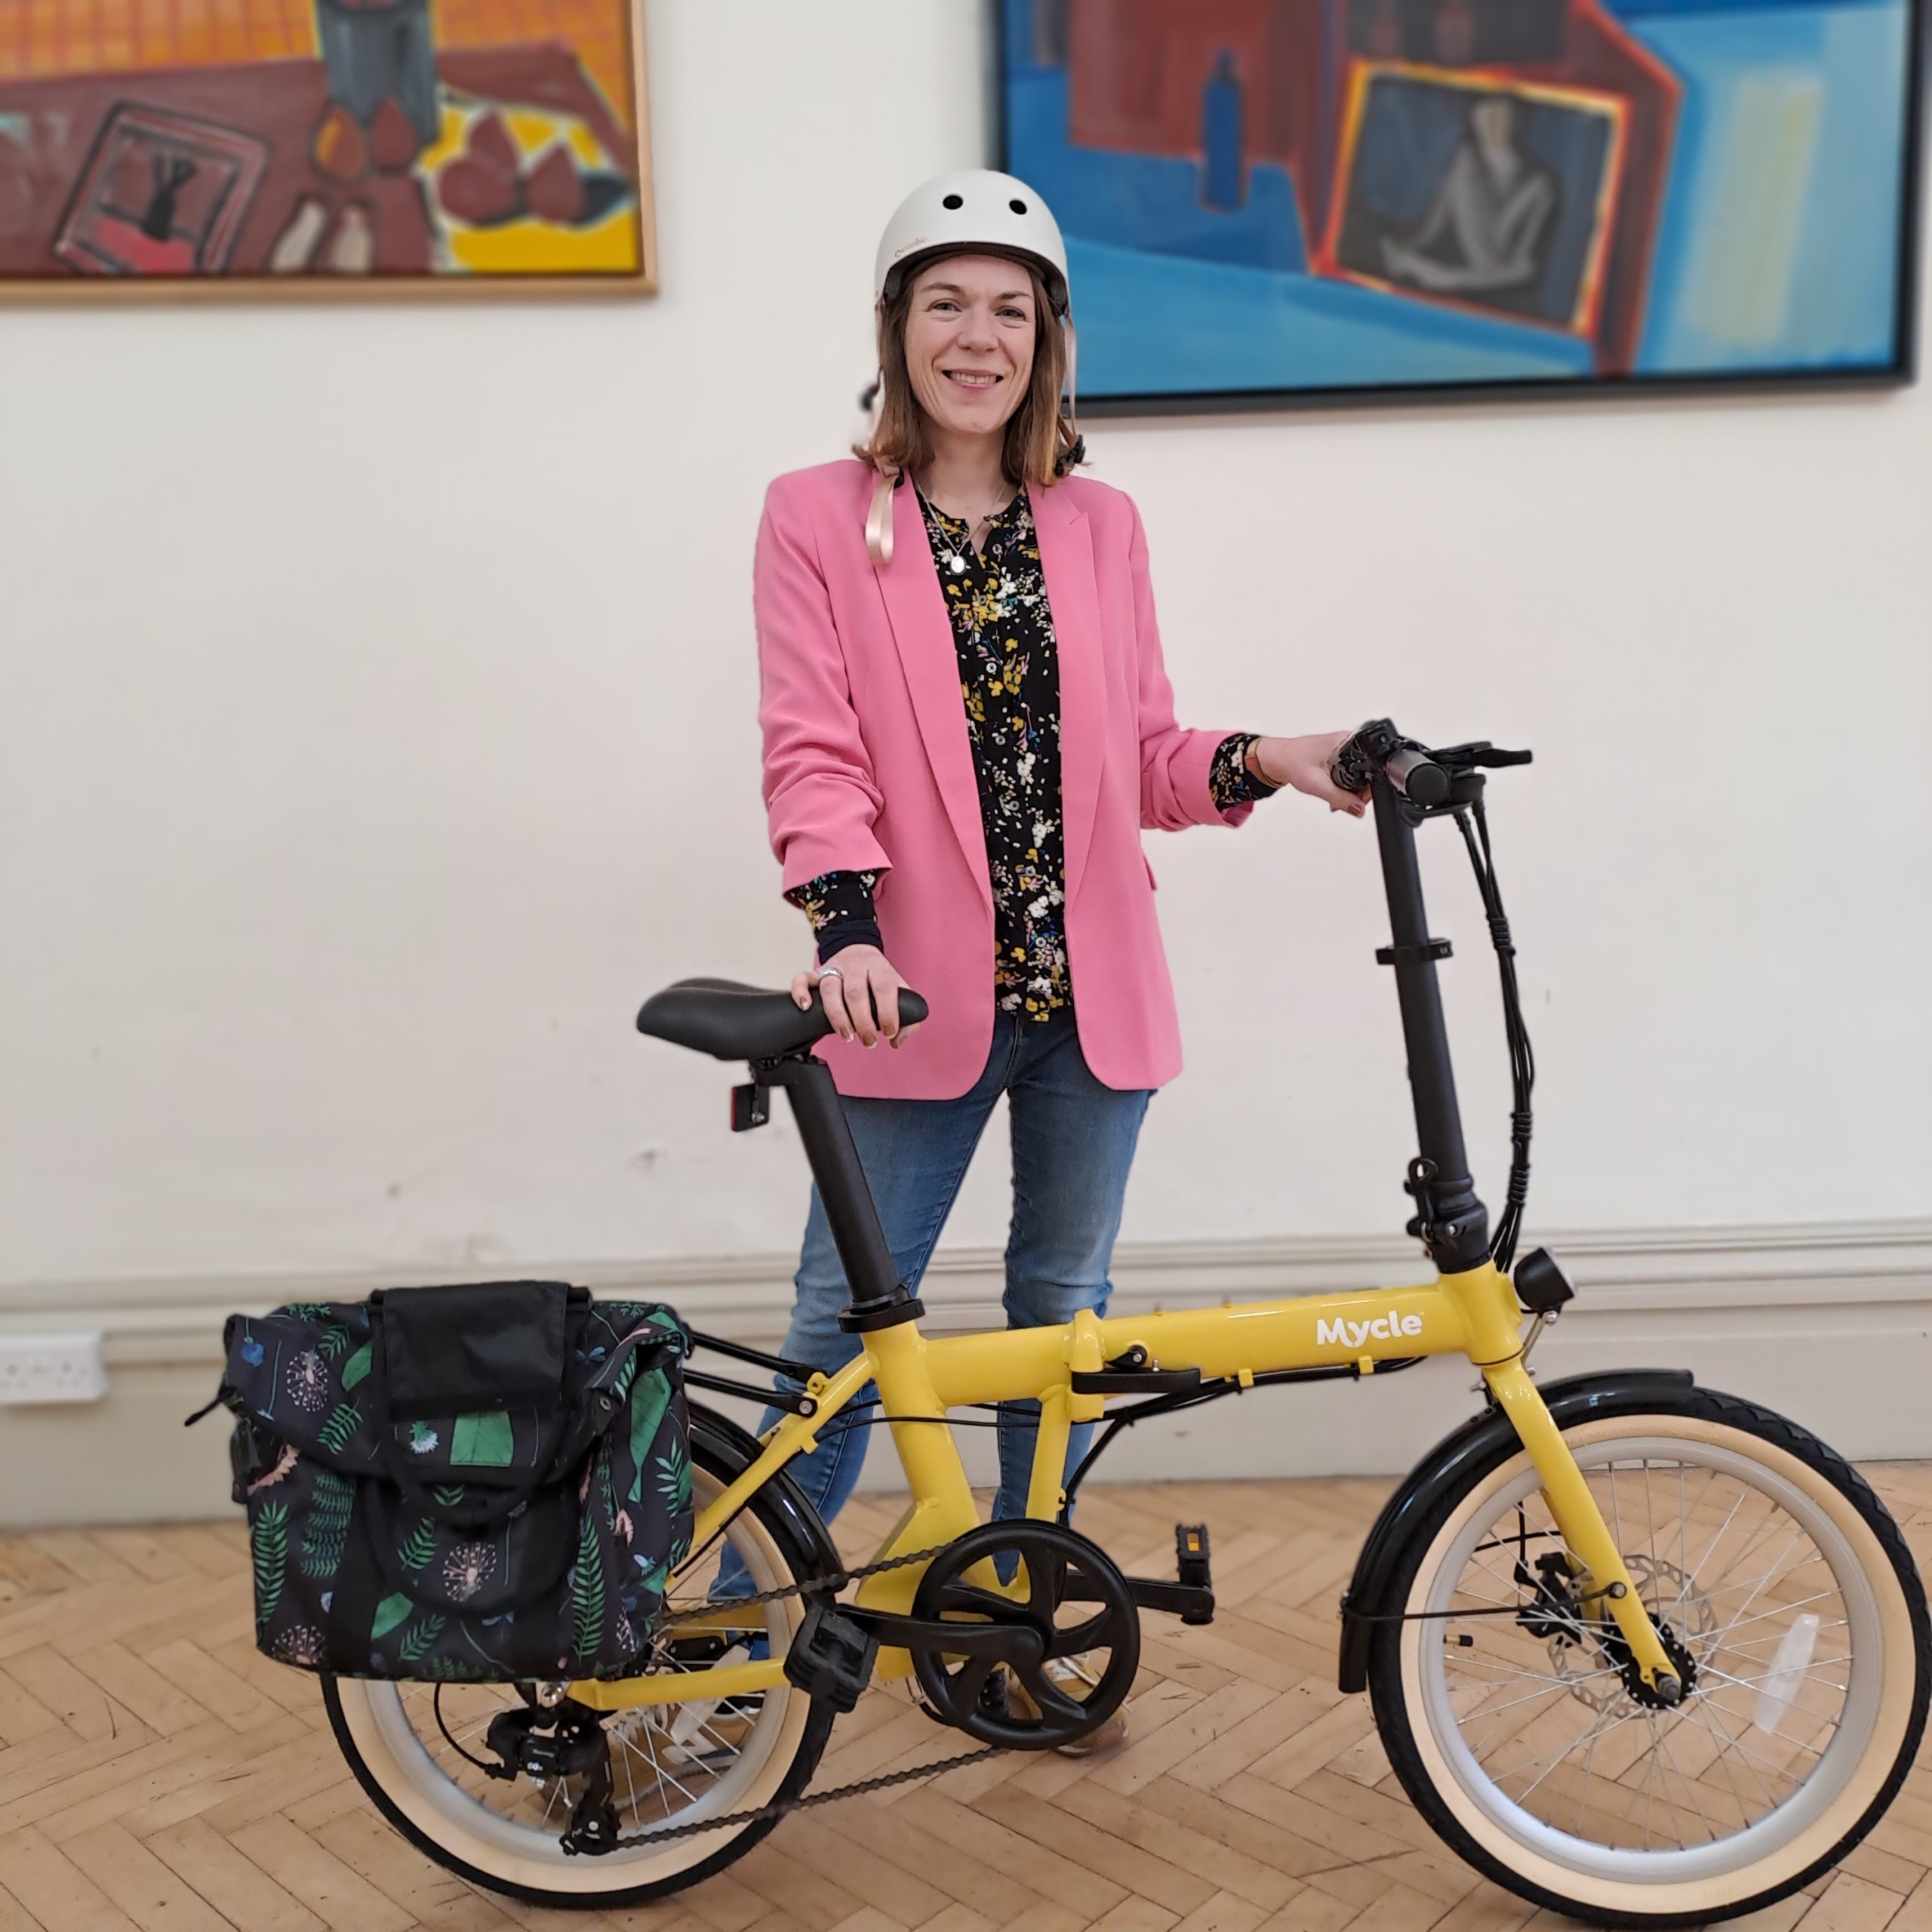 Review of the Mycle Compact folding ladies electric bike